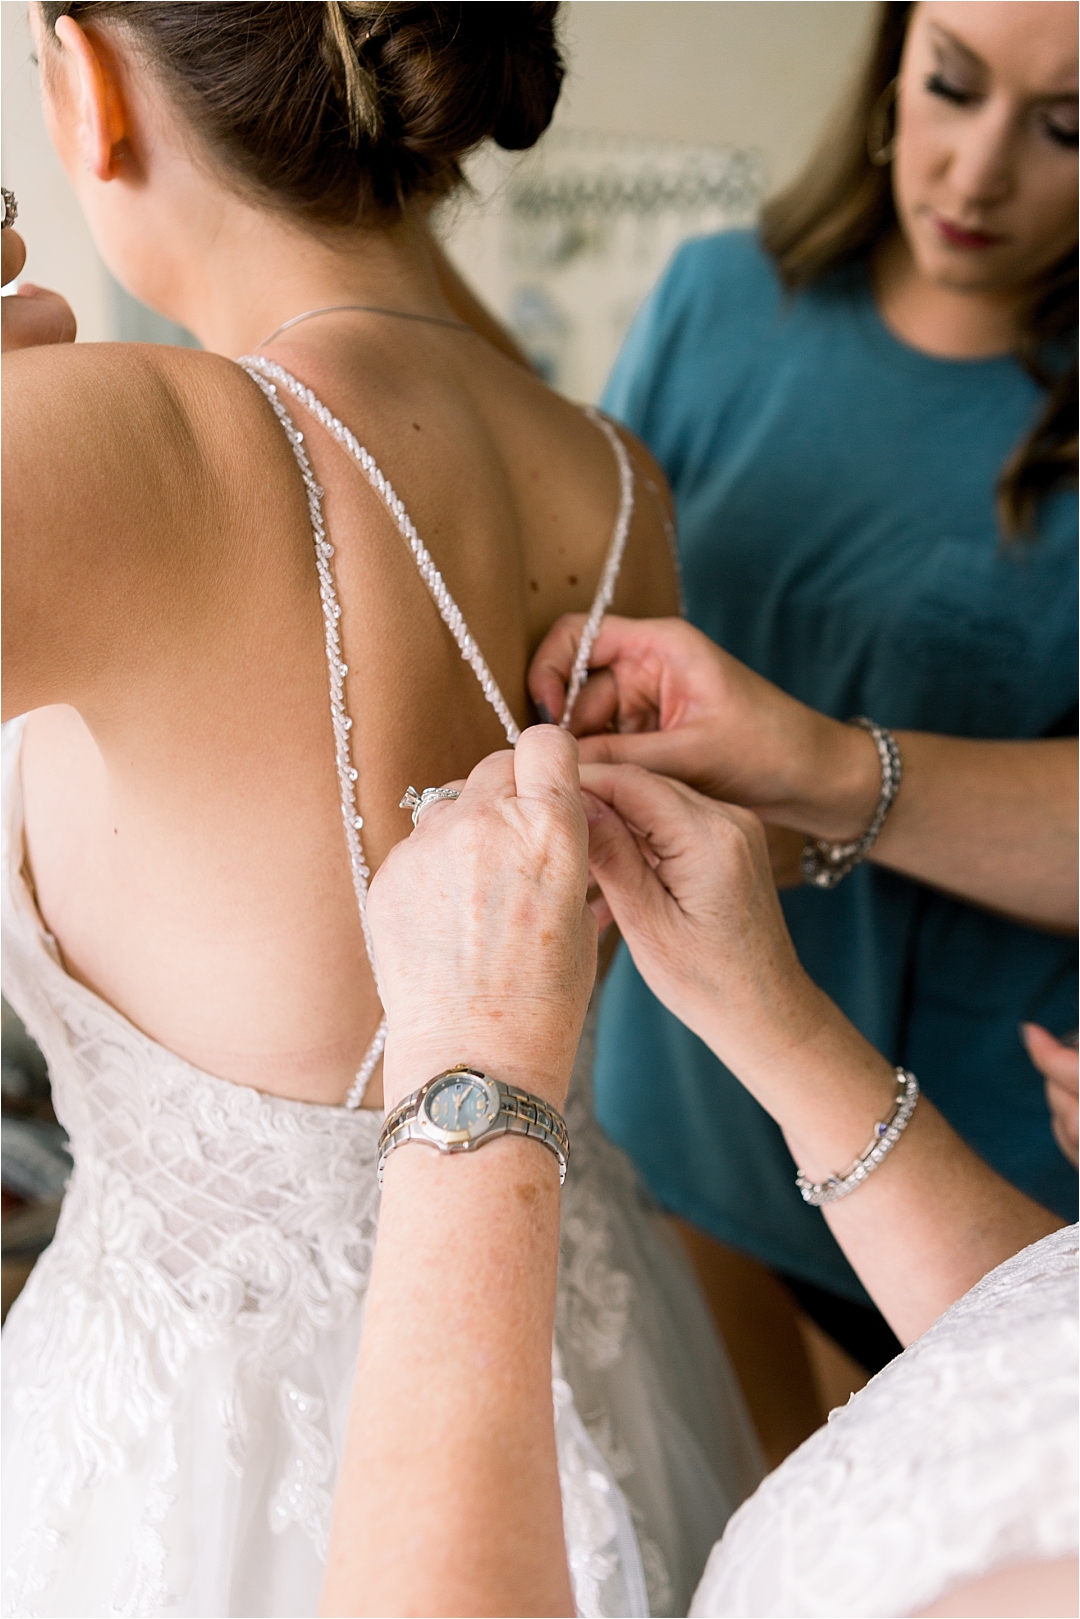 bride getting helped into wedding dress_Photos by Leigh Wolfe, Atlanta's Top Wedding Photographer